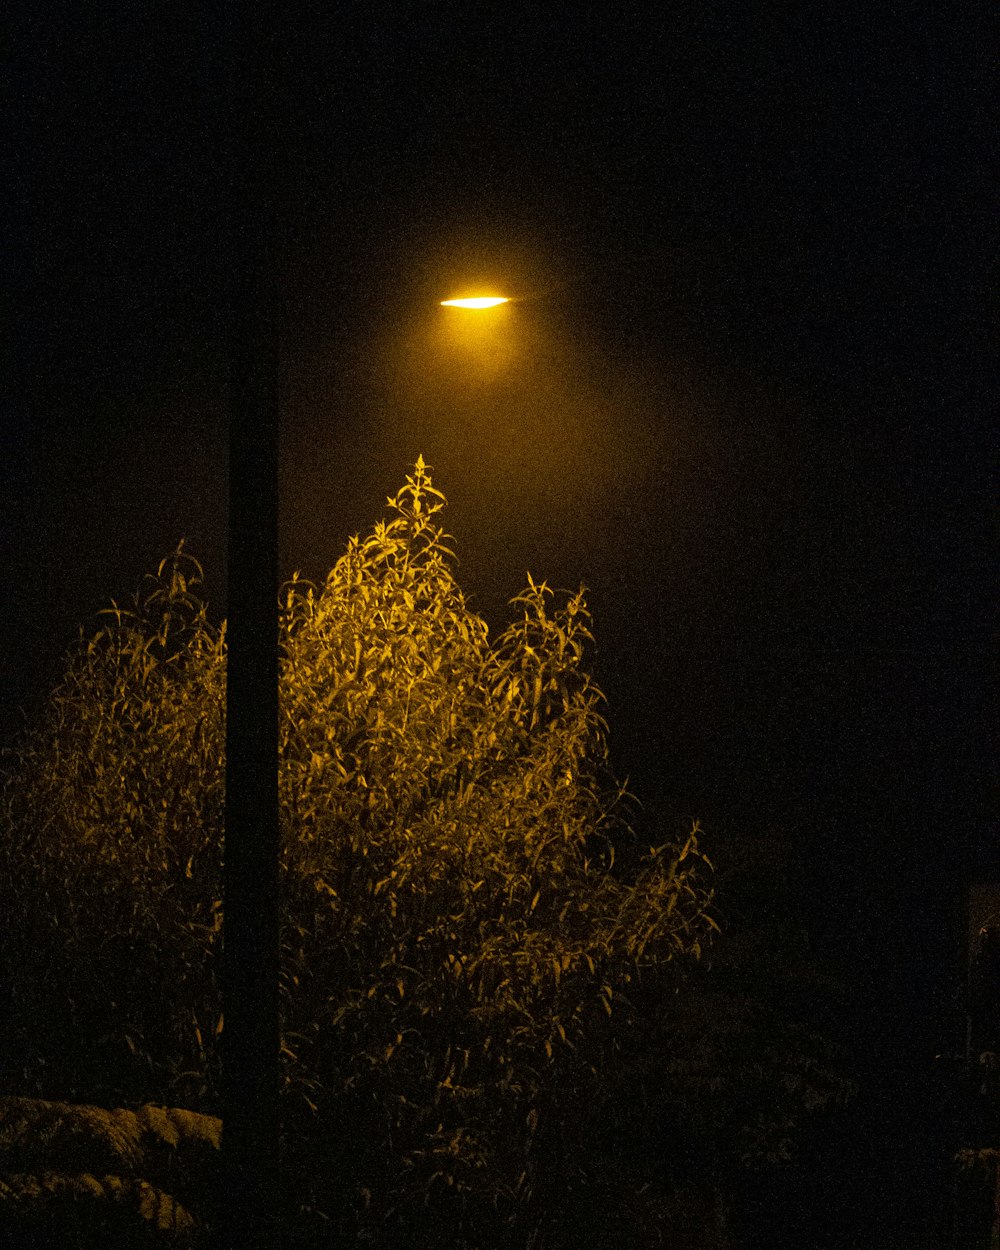 a street light shines brightly in the dark